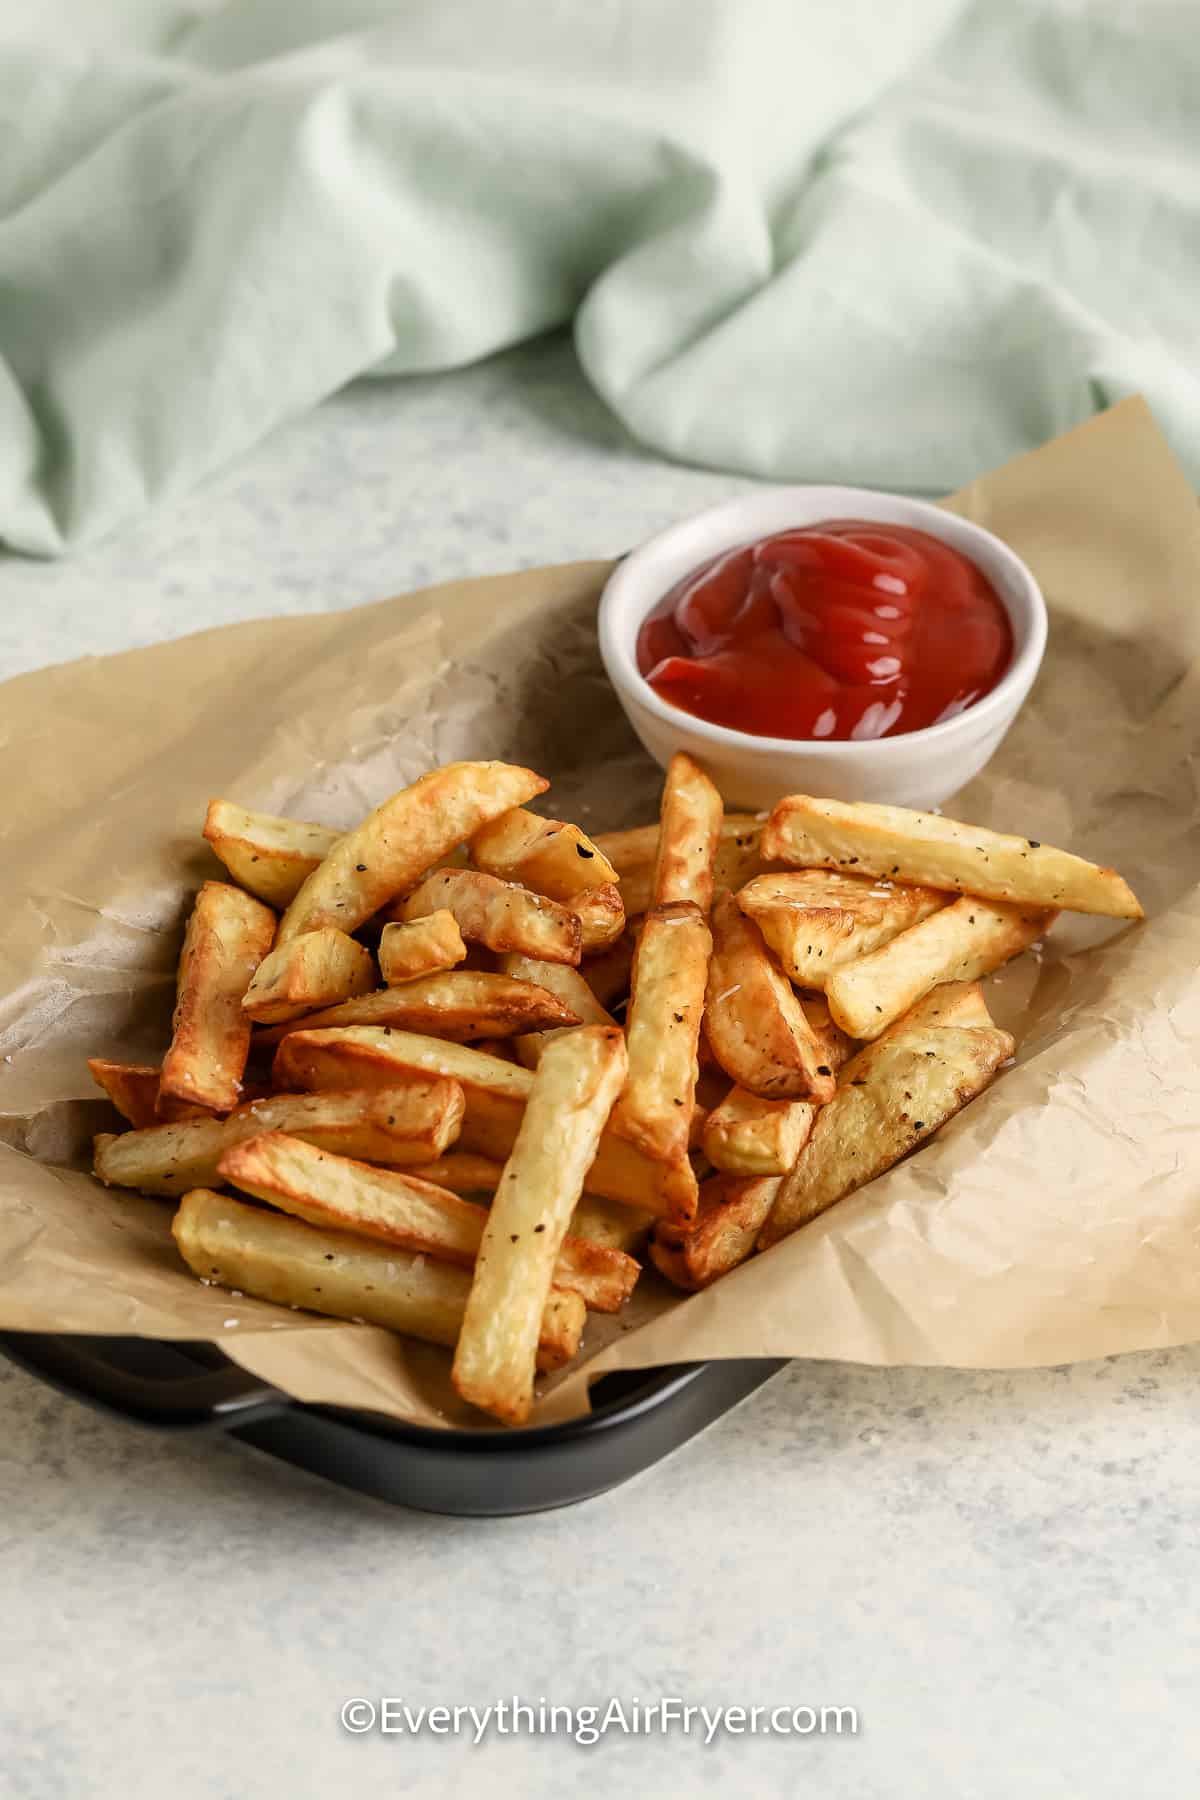 Homemade Air Fryer French Fries being served with Ketchup